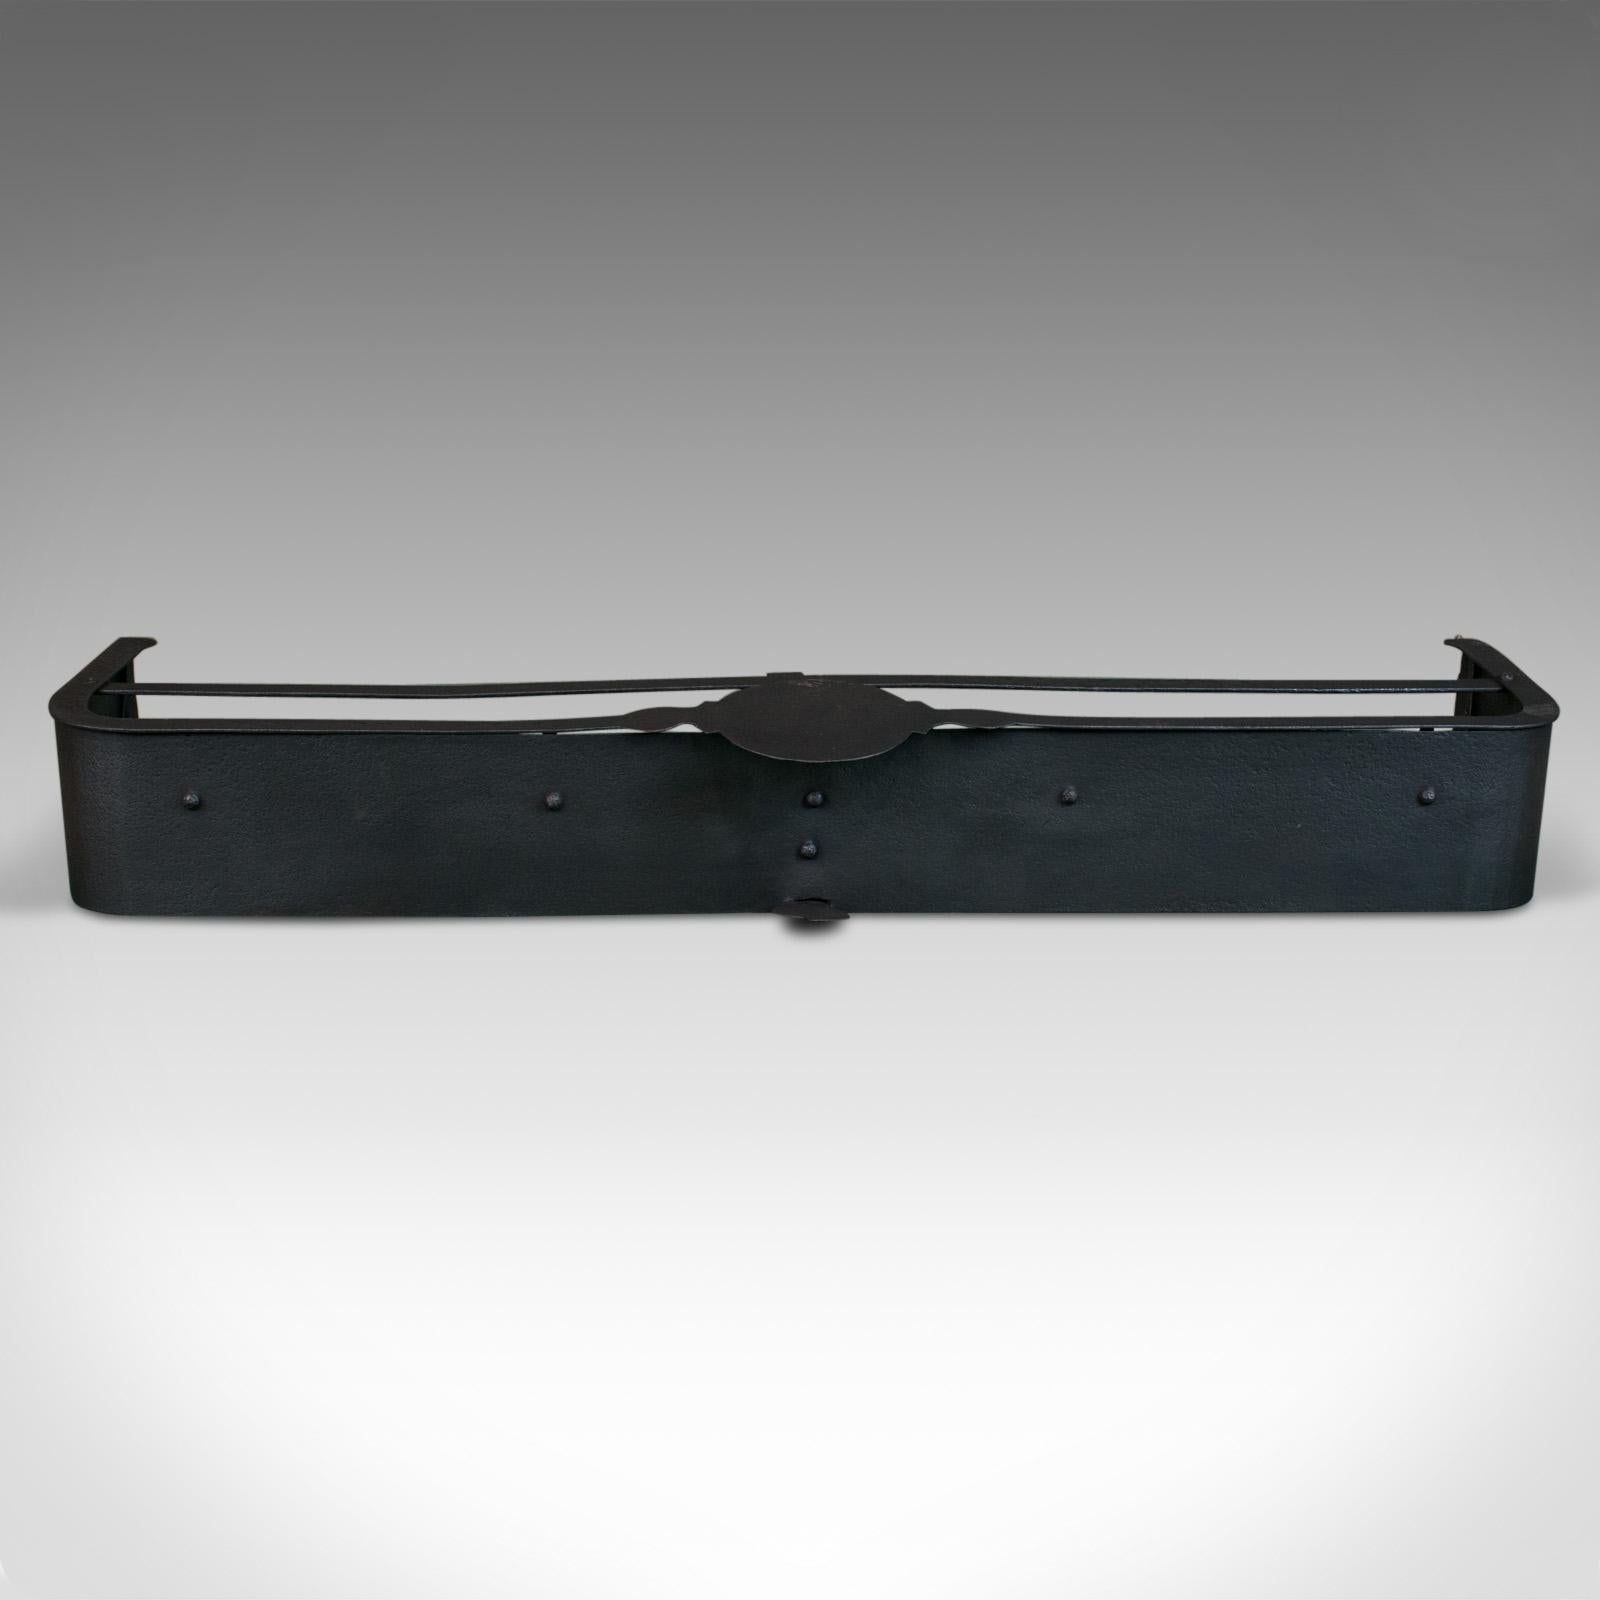 This is an antique fire surround. An English, Victorian fender hand crafted in iron dating to the late 19th century, circa 1890.

Large fire surround (106cm 41.75” wide), to compliment the larger fireplace
Attractive button rivet construction